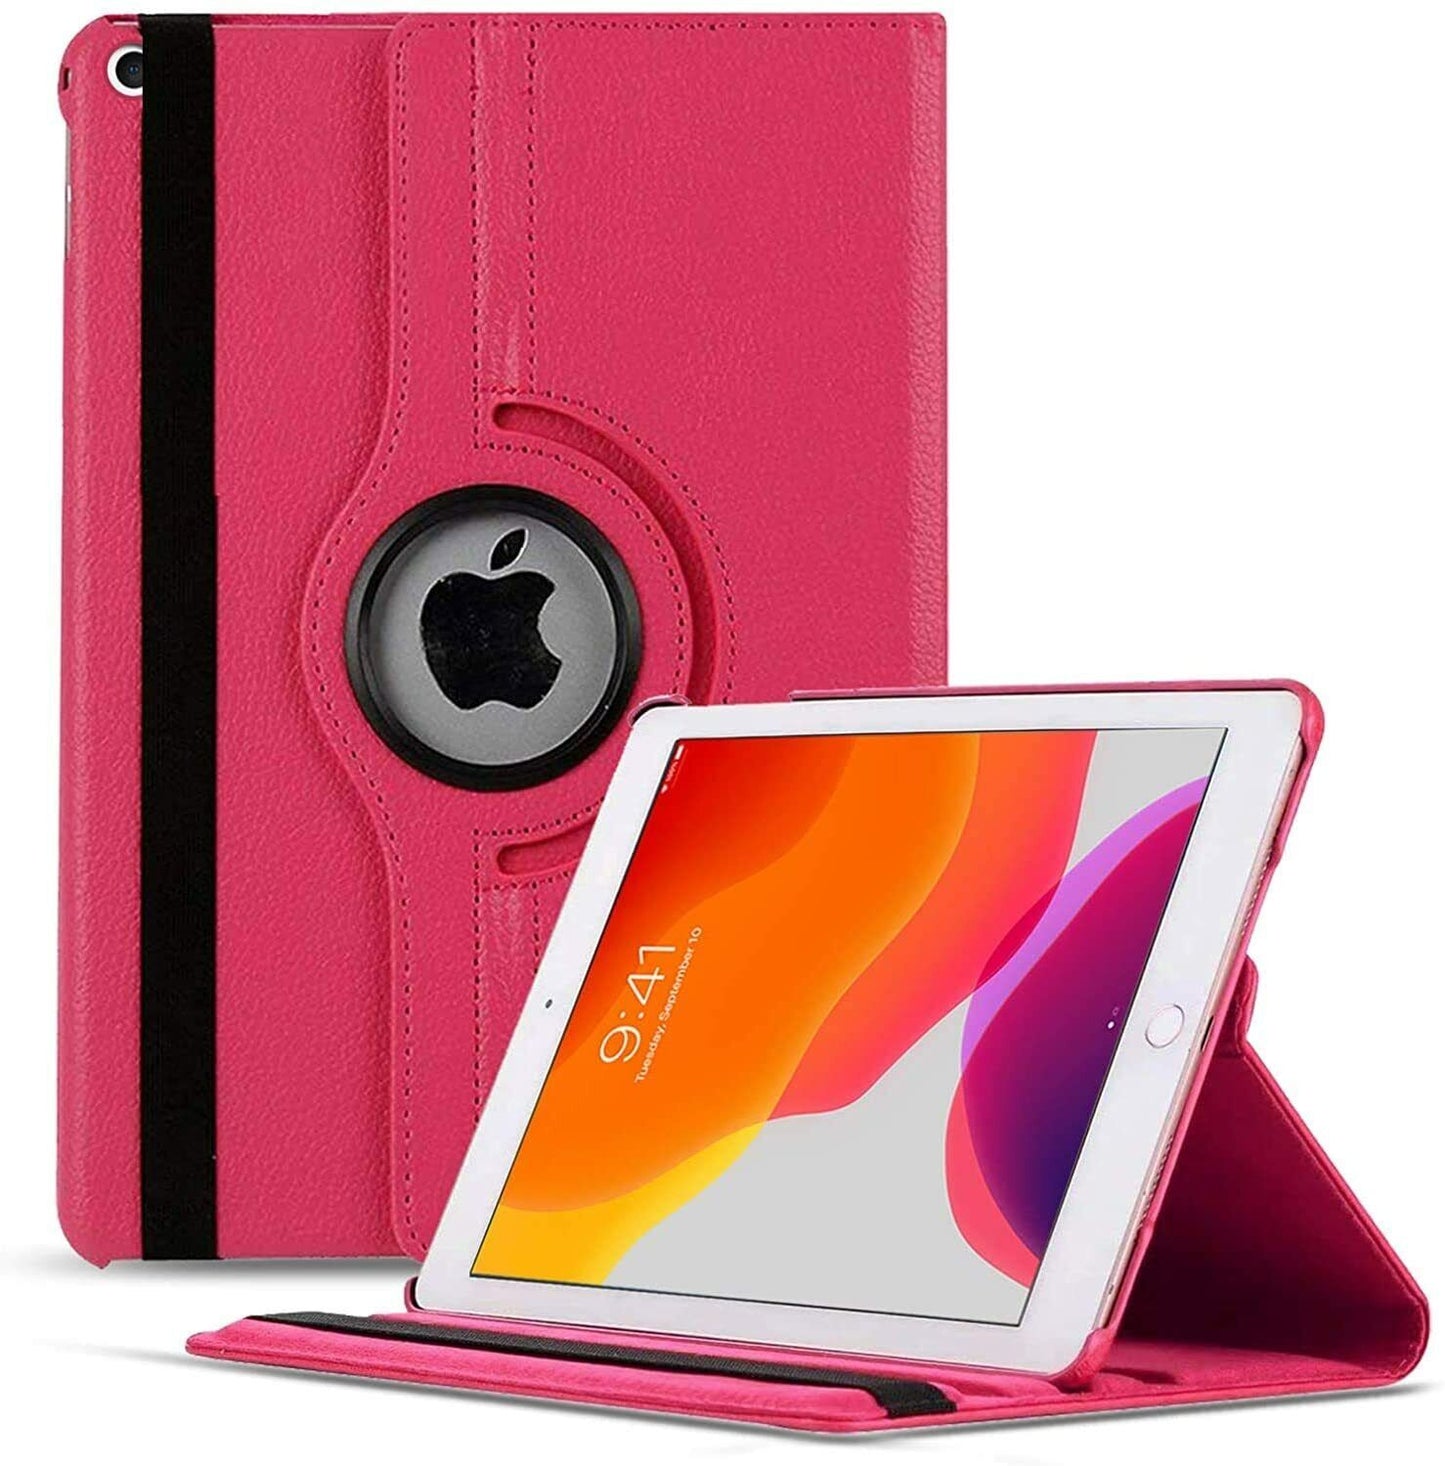 For Apple iPad 9th Gen 10.2 2021 360 Degree Hot Pink Flip PU Leather Smart Case Cover